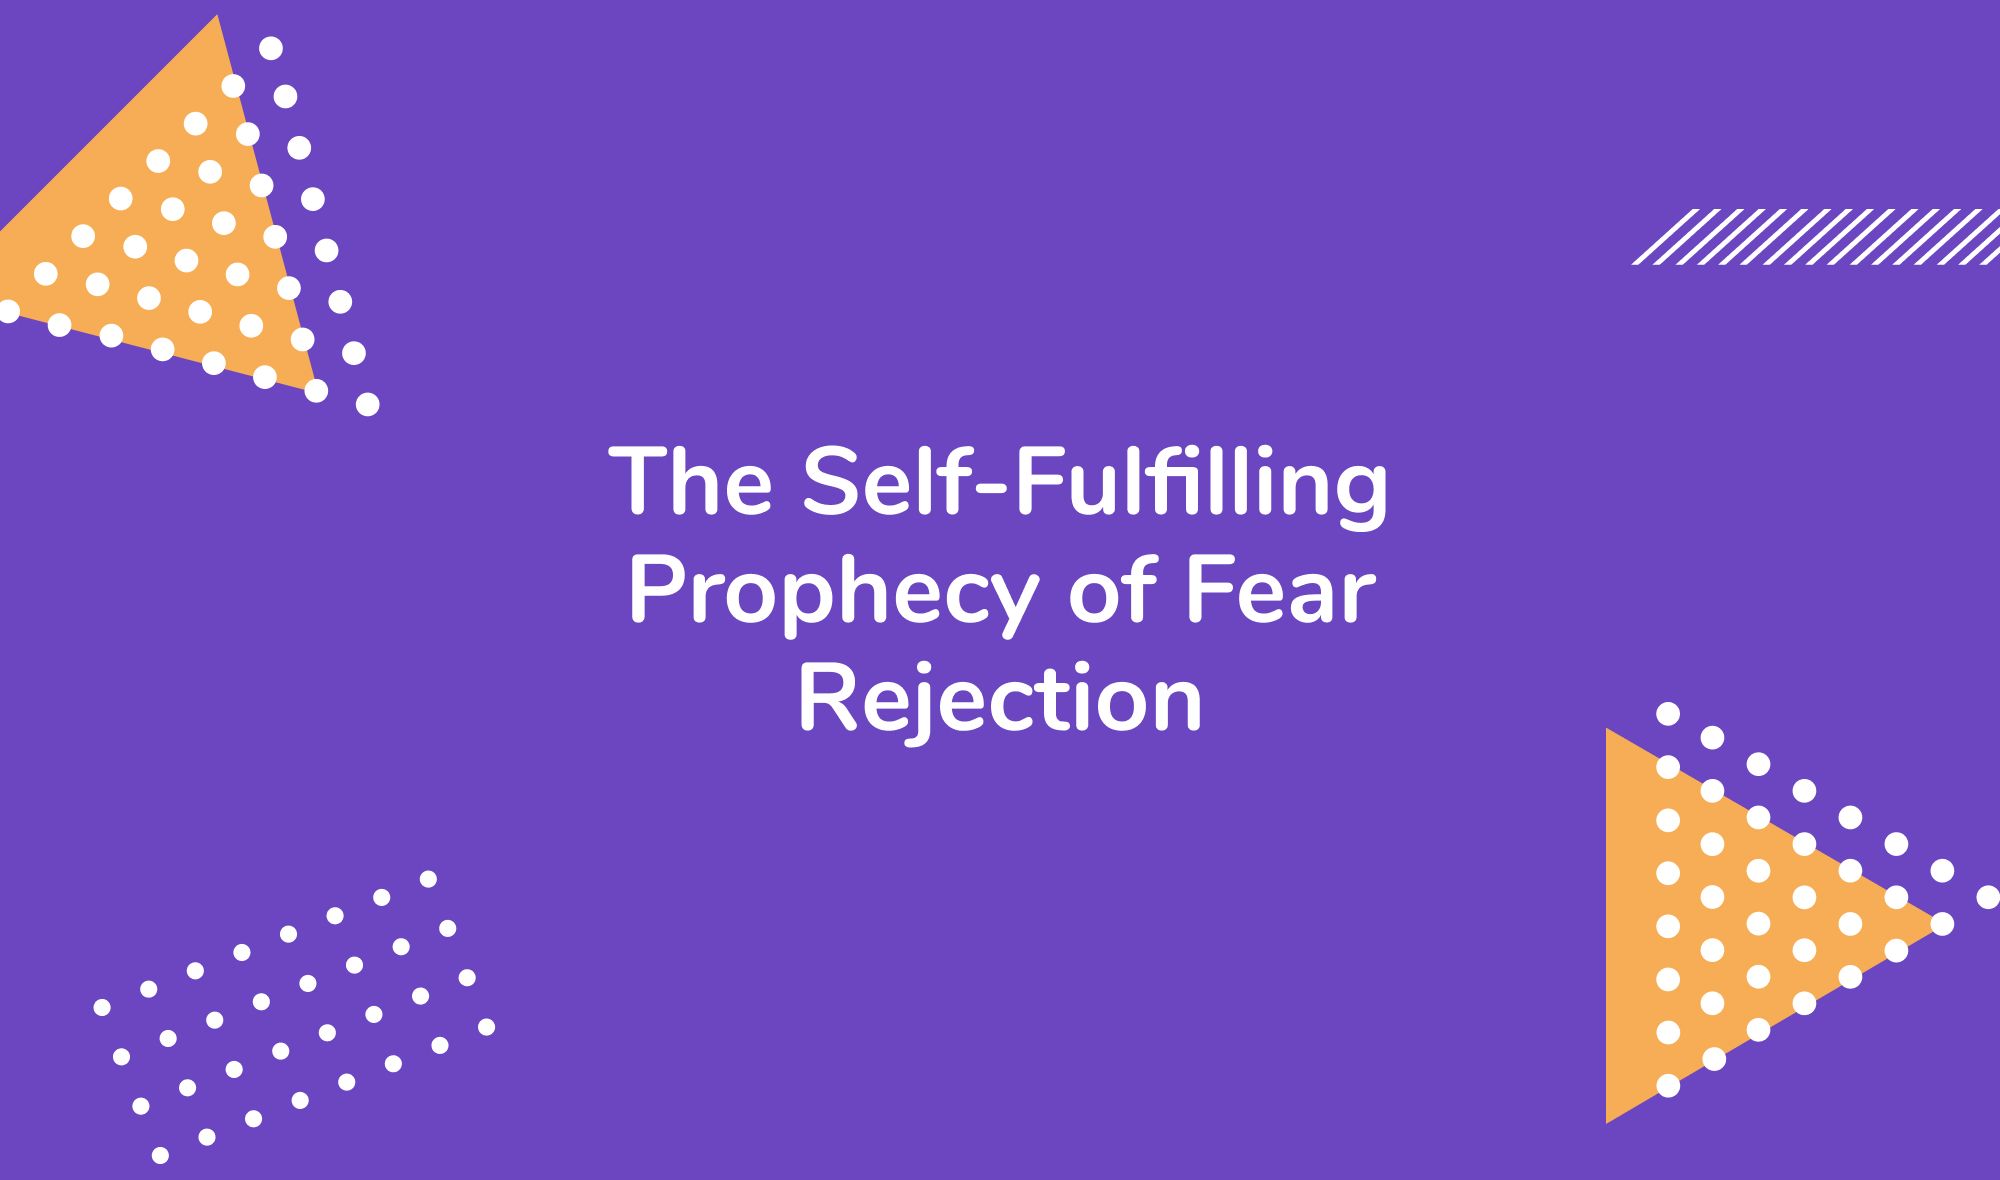 The Self-Fulfilling Prophecy of Fear Rejection